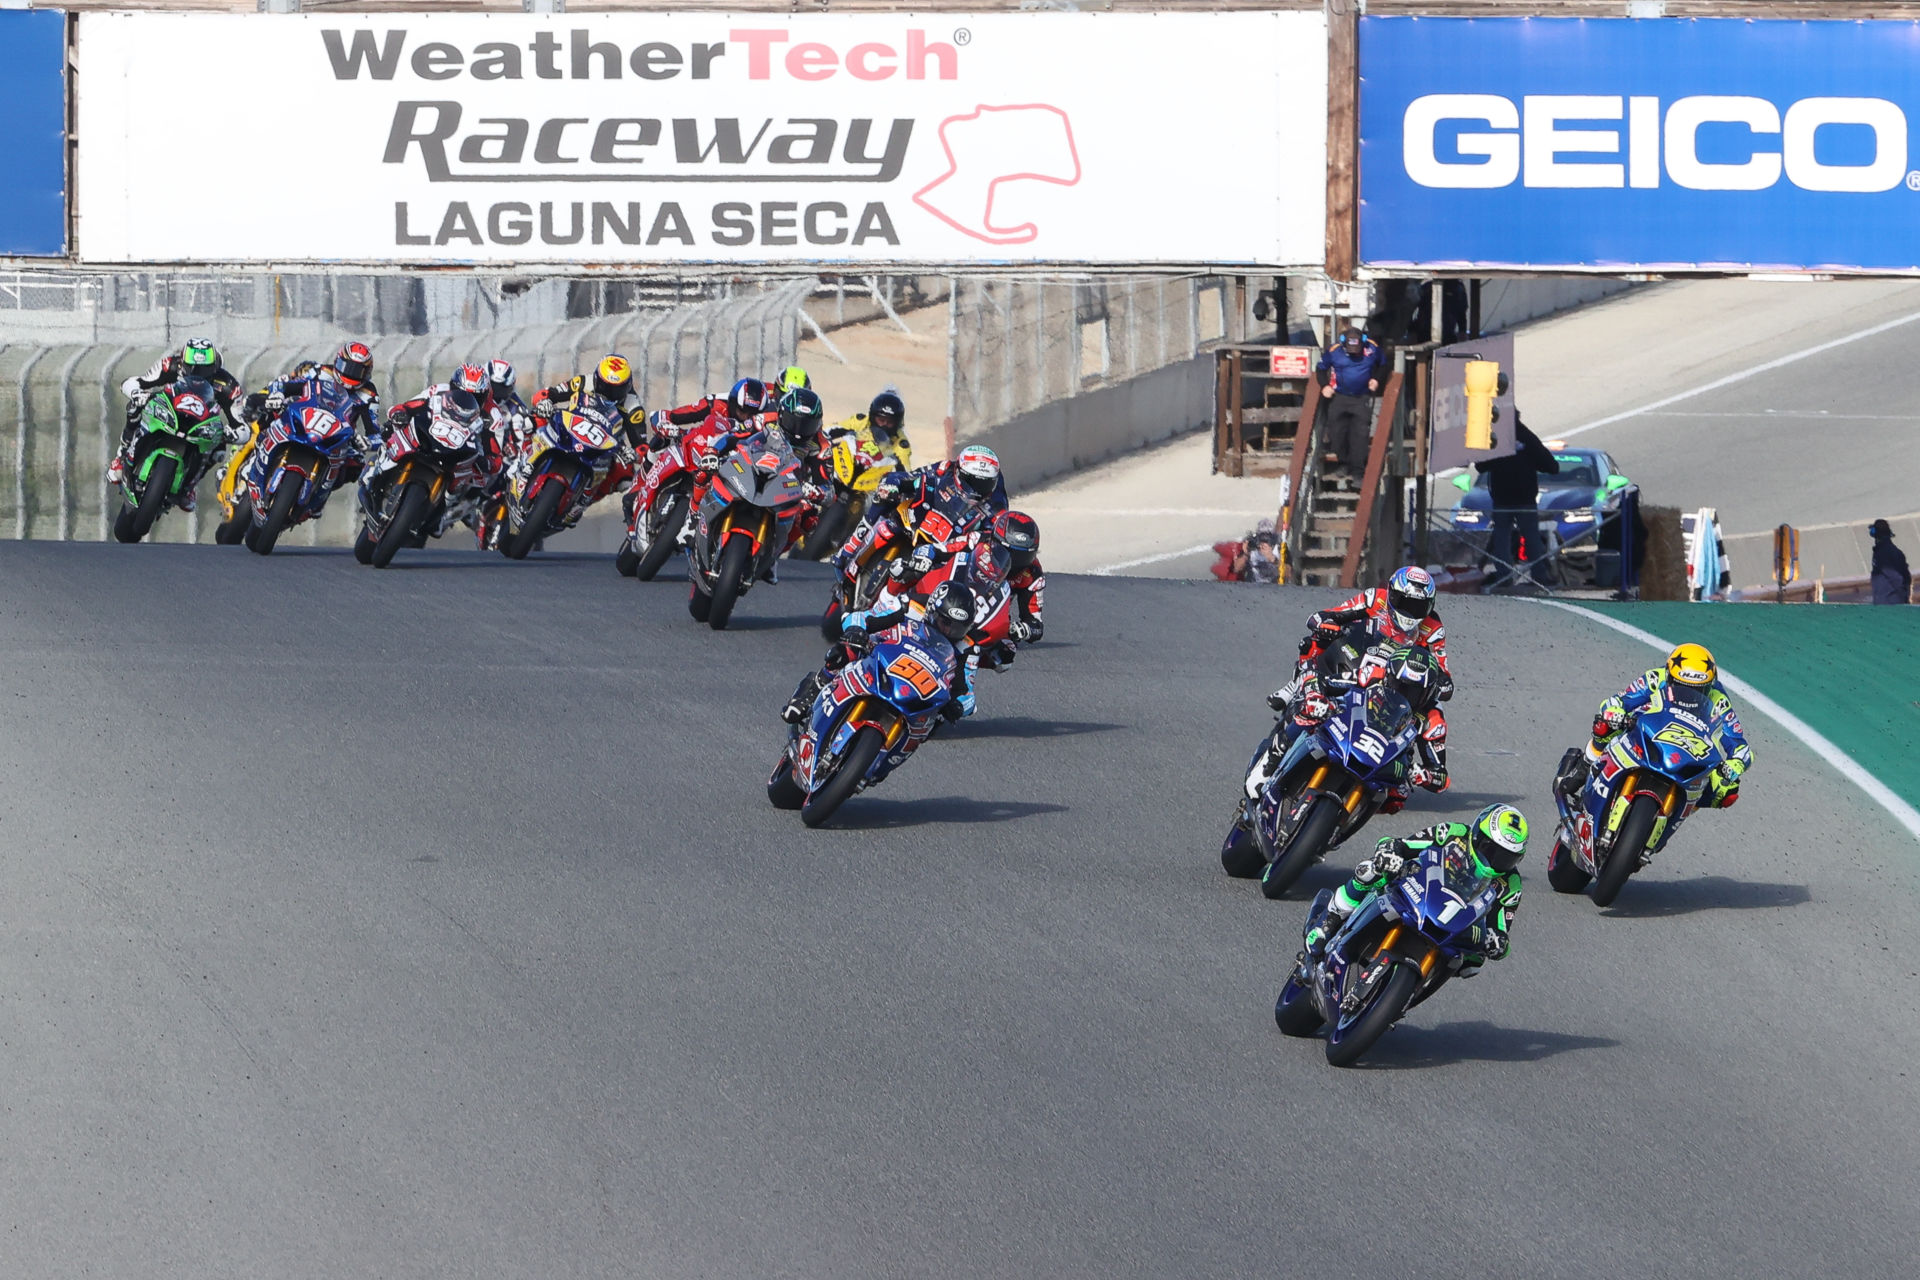 Cameron Beaubier (1) leads Toni Elias (24), Jake Gage (32), Lorenzo Zanetti (behind Gagne), Bobby Fong (50), Kyle Wyman (behind Fong), Niccolo Canepa (behind Wyman), Josh Herrin (2), and the rest of the HONOS Superbike field during a race start Sunday at Laguna Seca. Photo by Brian J. Nelson, courtesy MotoAmerica.